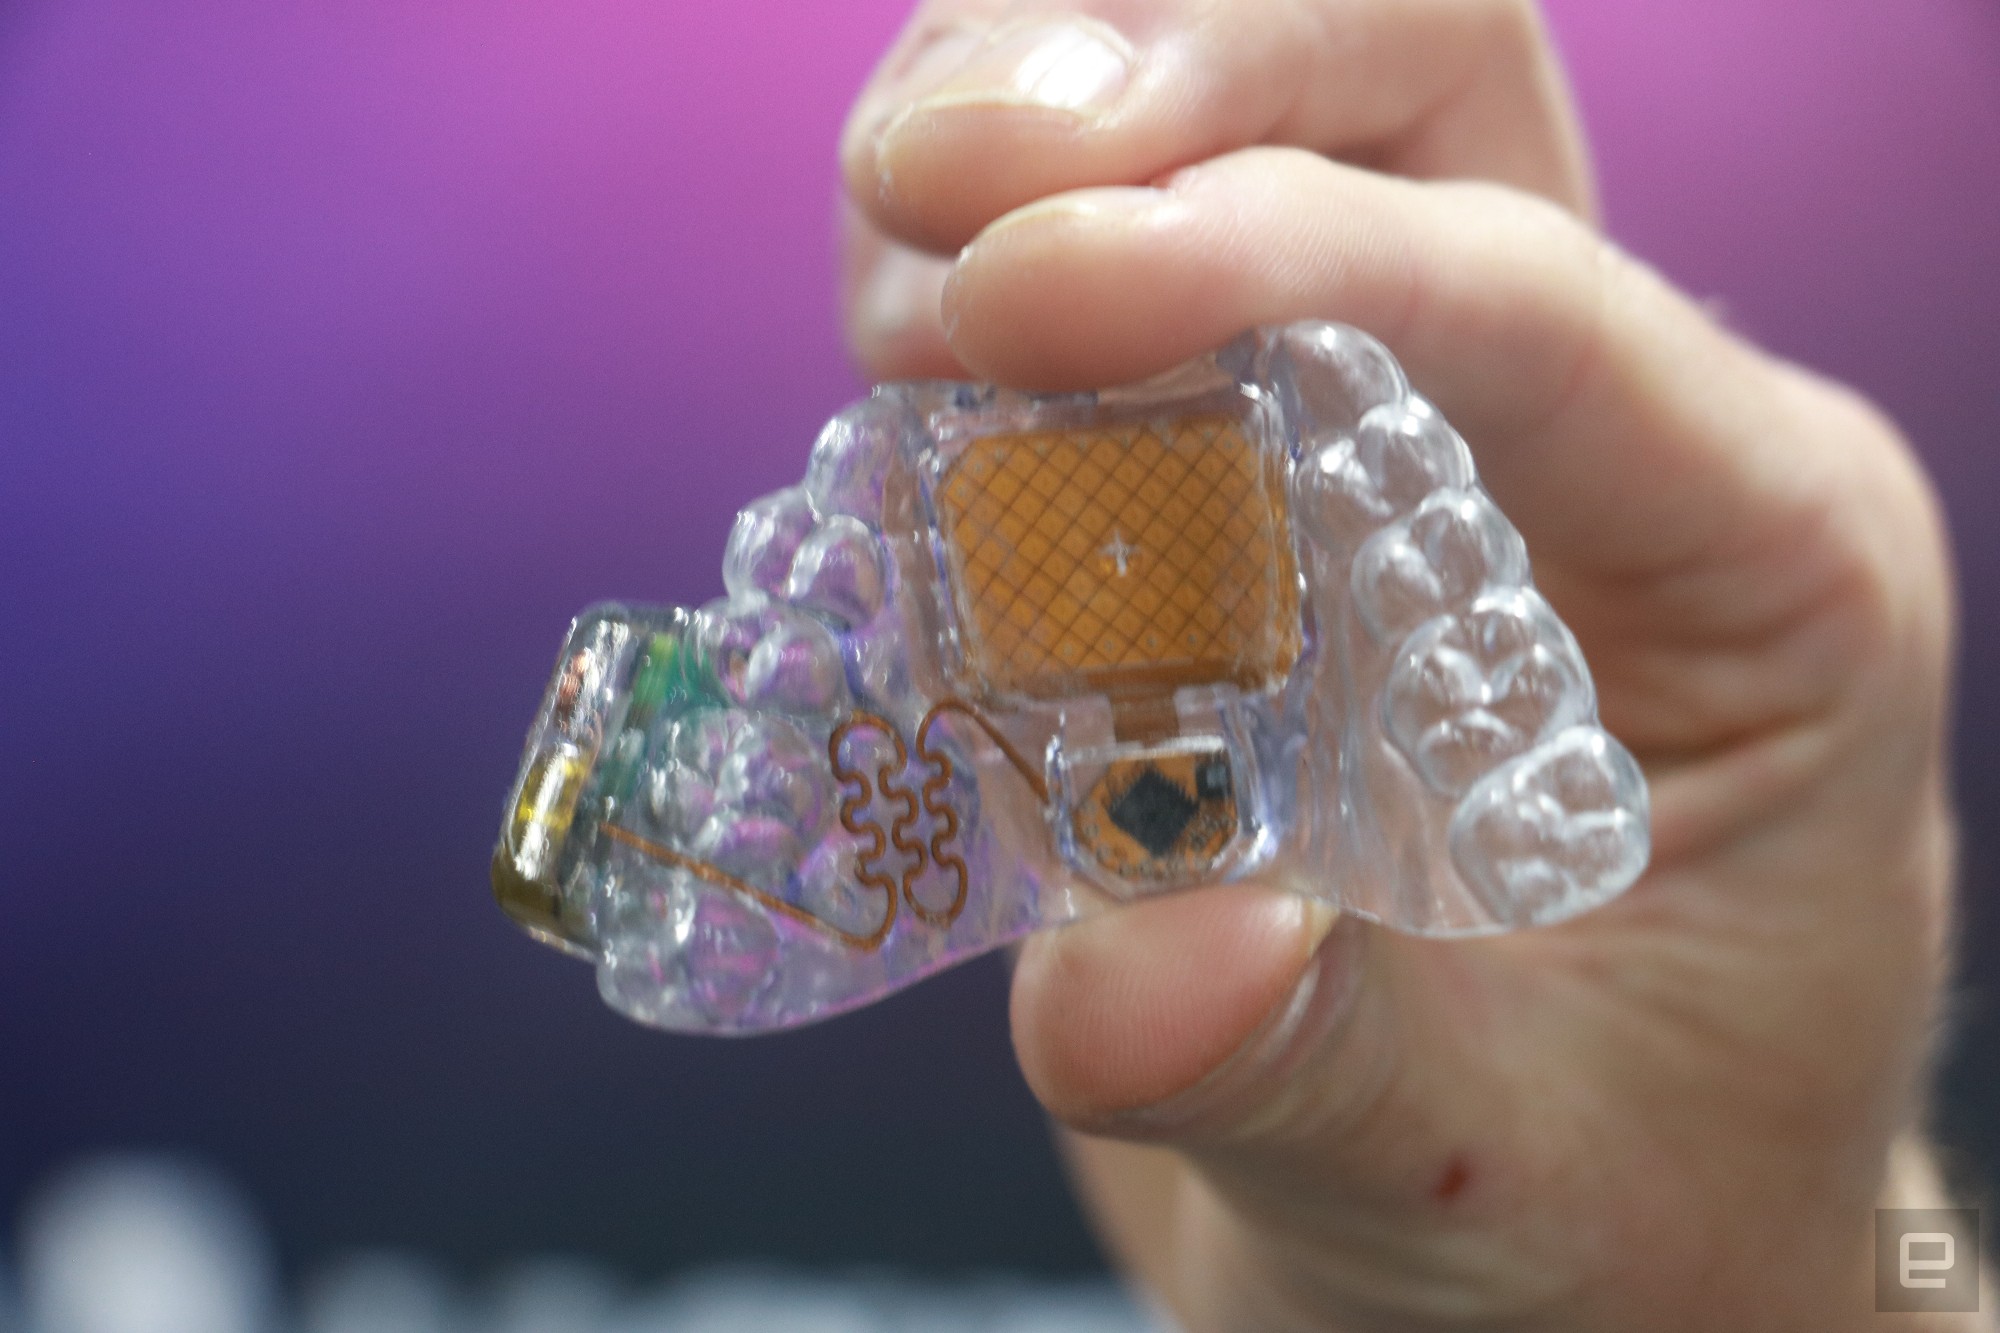 The MouthPad, a tongue-operate controller, held up in mid-air. It's a clear dental tray with an orange touchpad in the middle and some circuitry throughout.